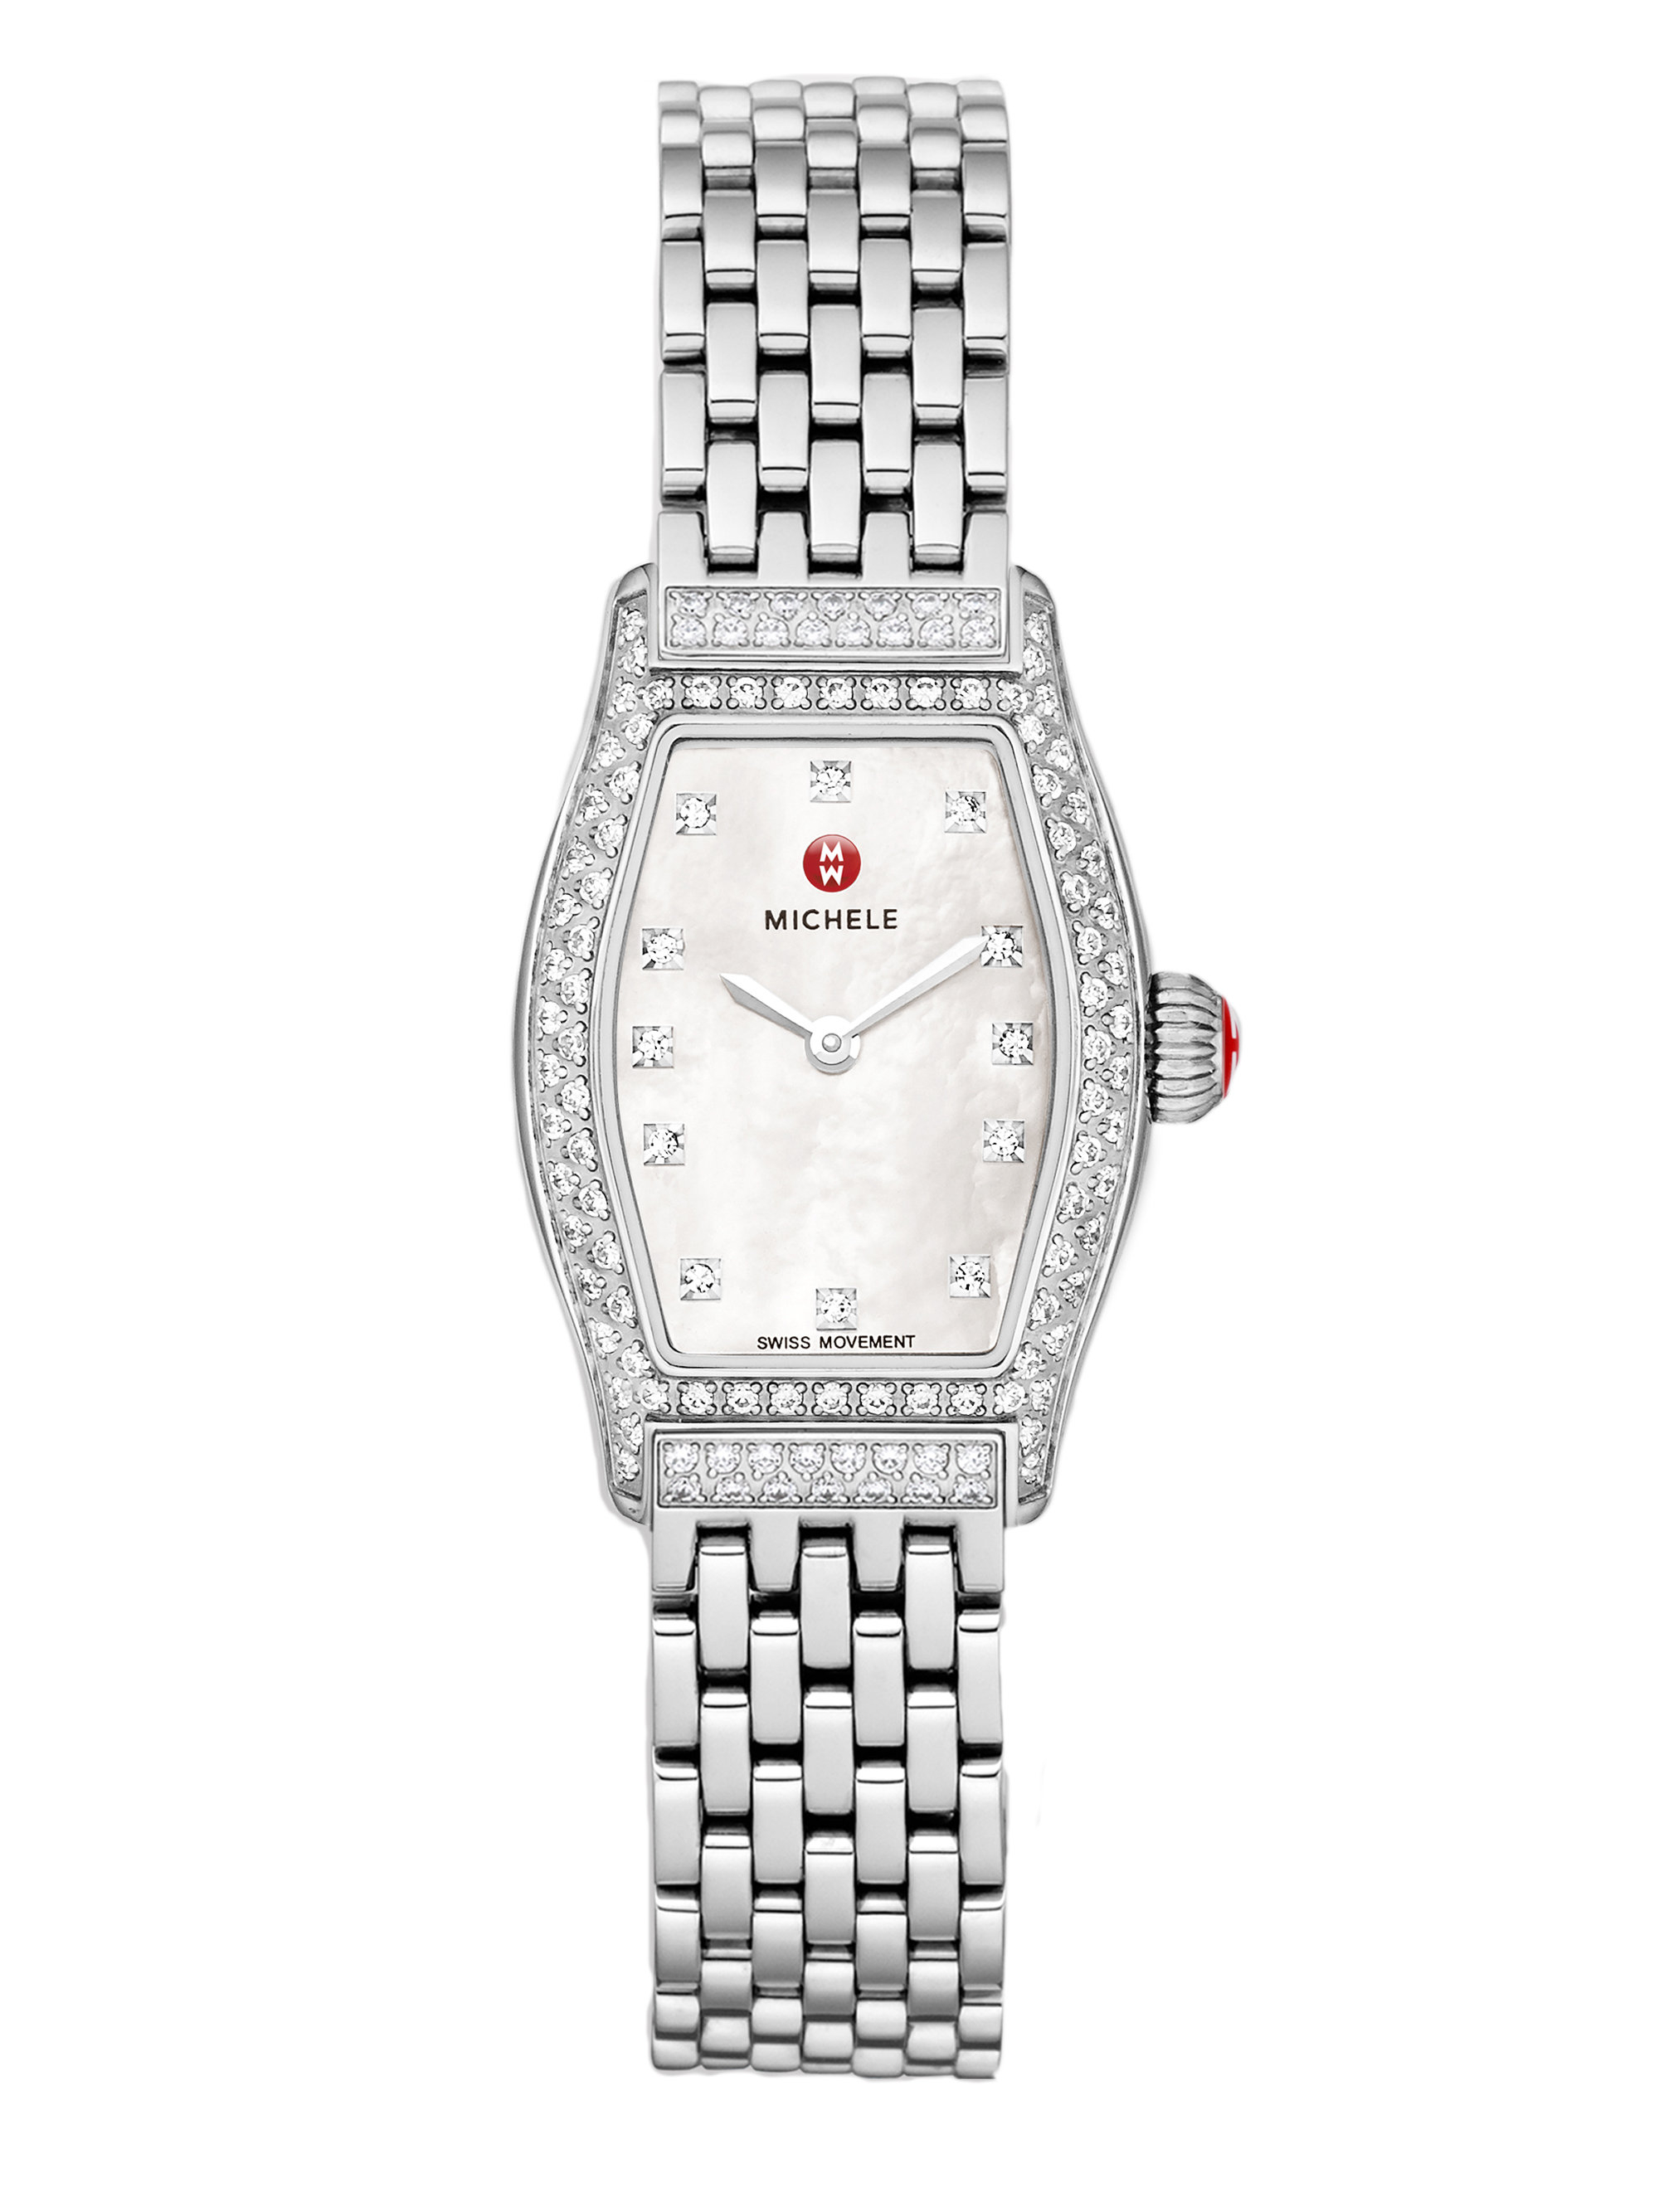 Michele Urban Coquette 12 Diamond, Mother-of-pearl & Stainless Steel ...